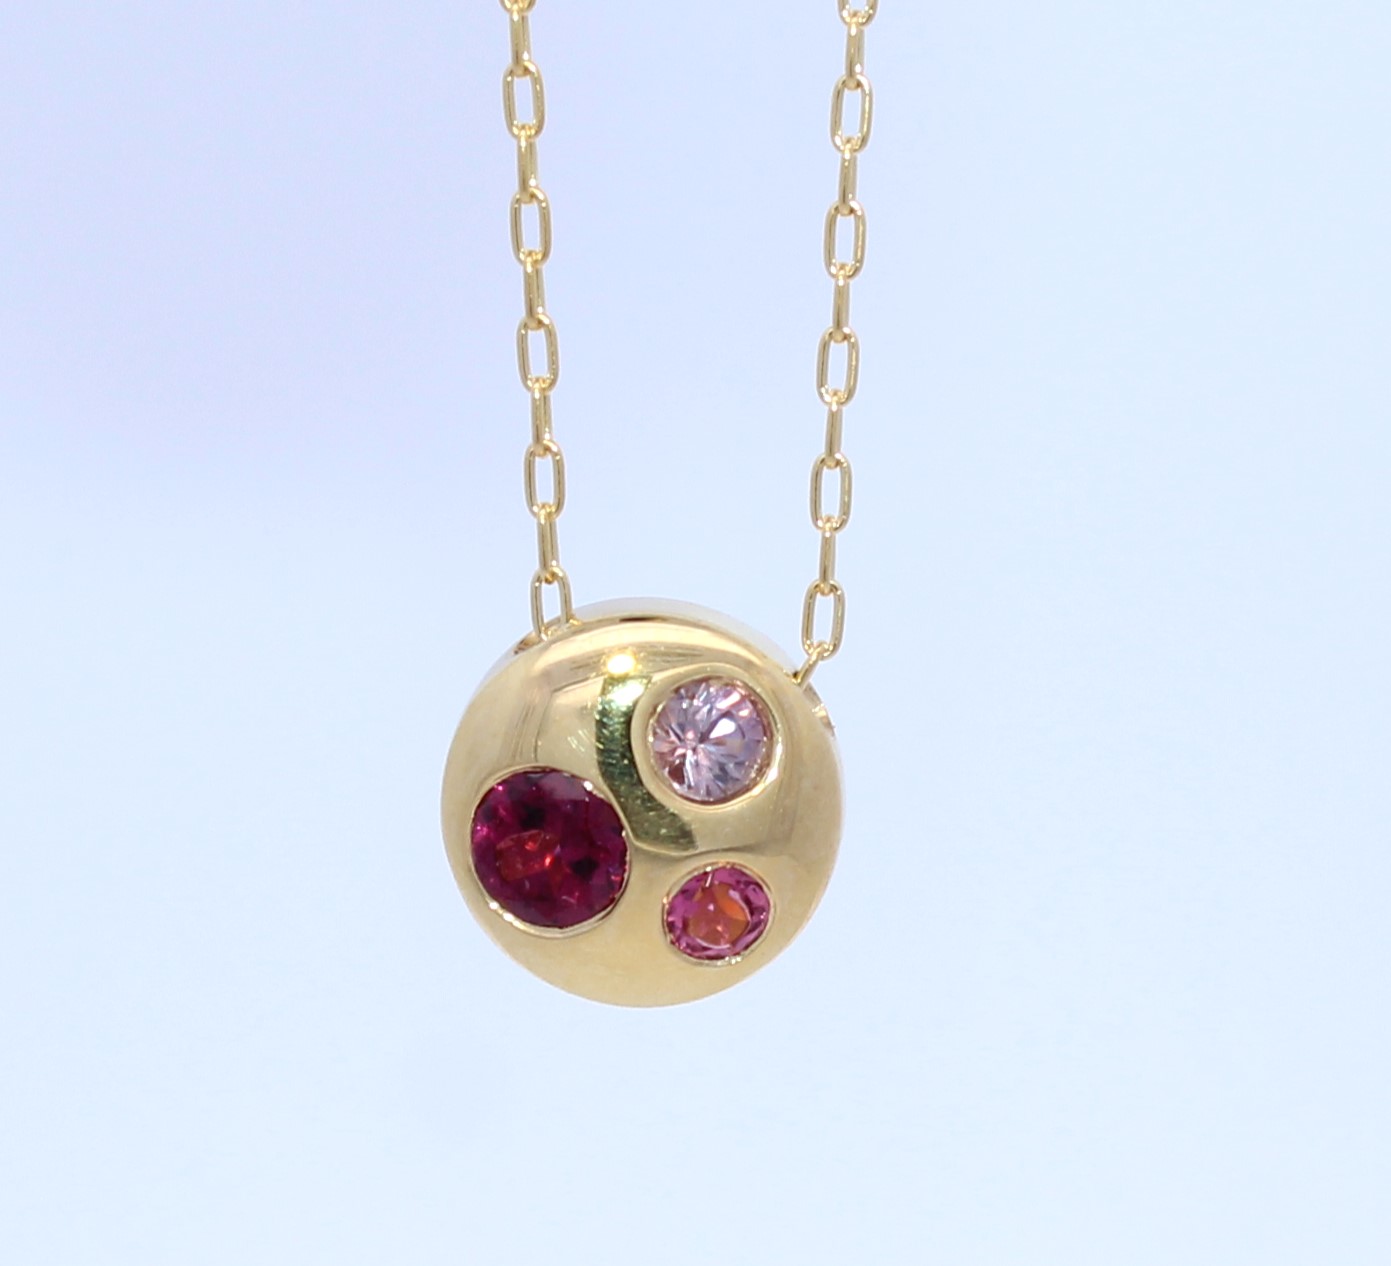 Lauren K 18 Karat Yellow Gold Garnet  Pink Tourmaline And Pink Spinel Pendant Necklace 18 Inches From The Polly Collection